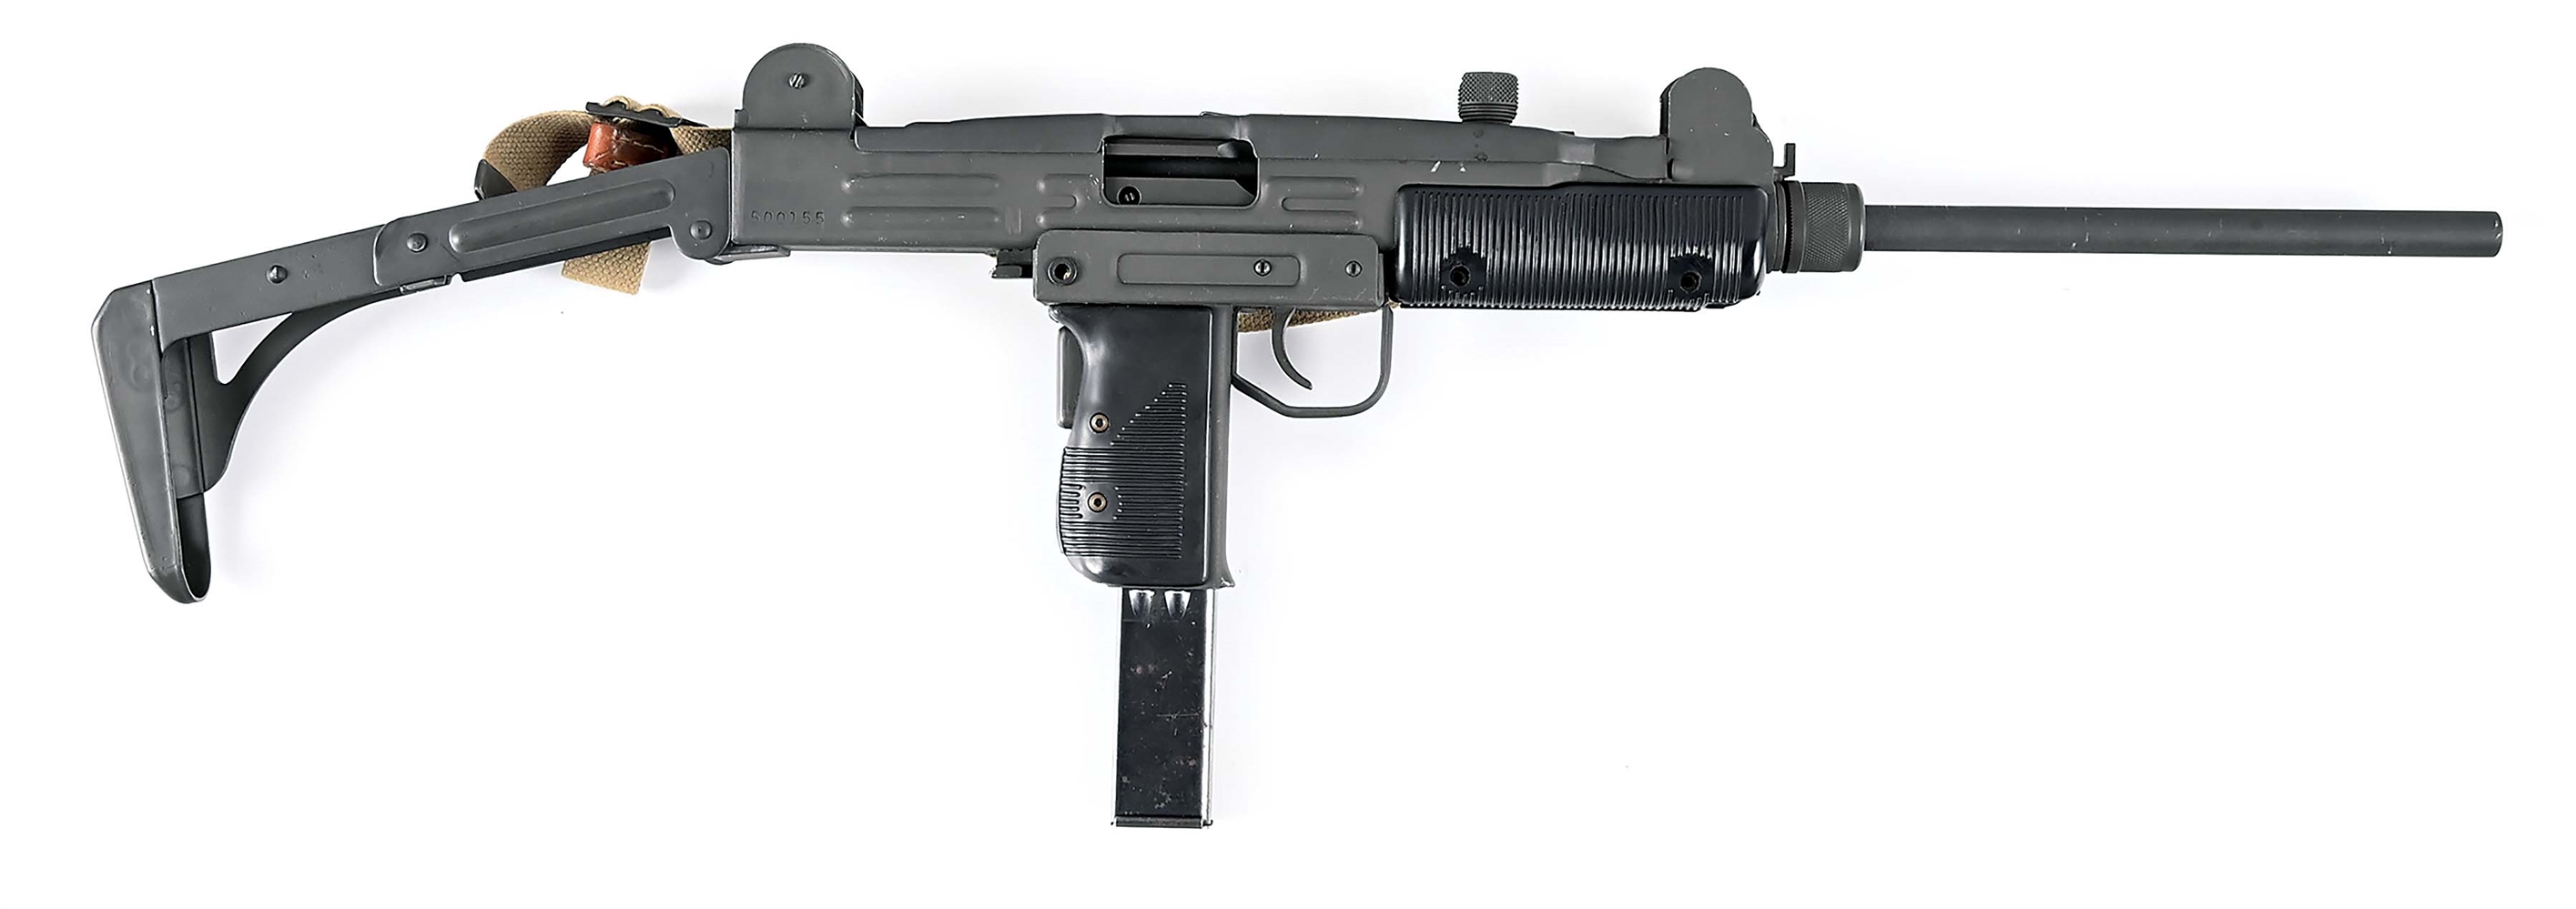 (M) GROUP INDUSTRIES / CENTURY ARMS INTERNATIONAL MODEL A SPORTER SEMI-AUTOMATIC RIFLE